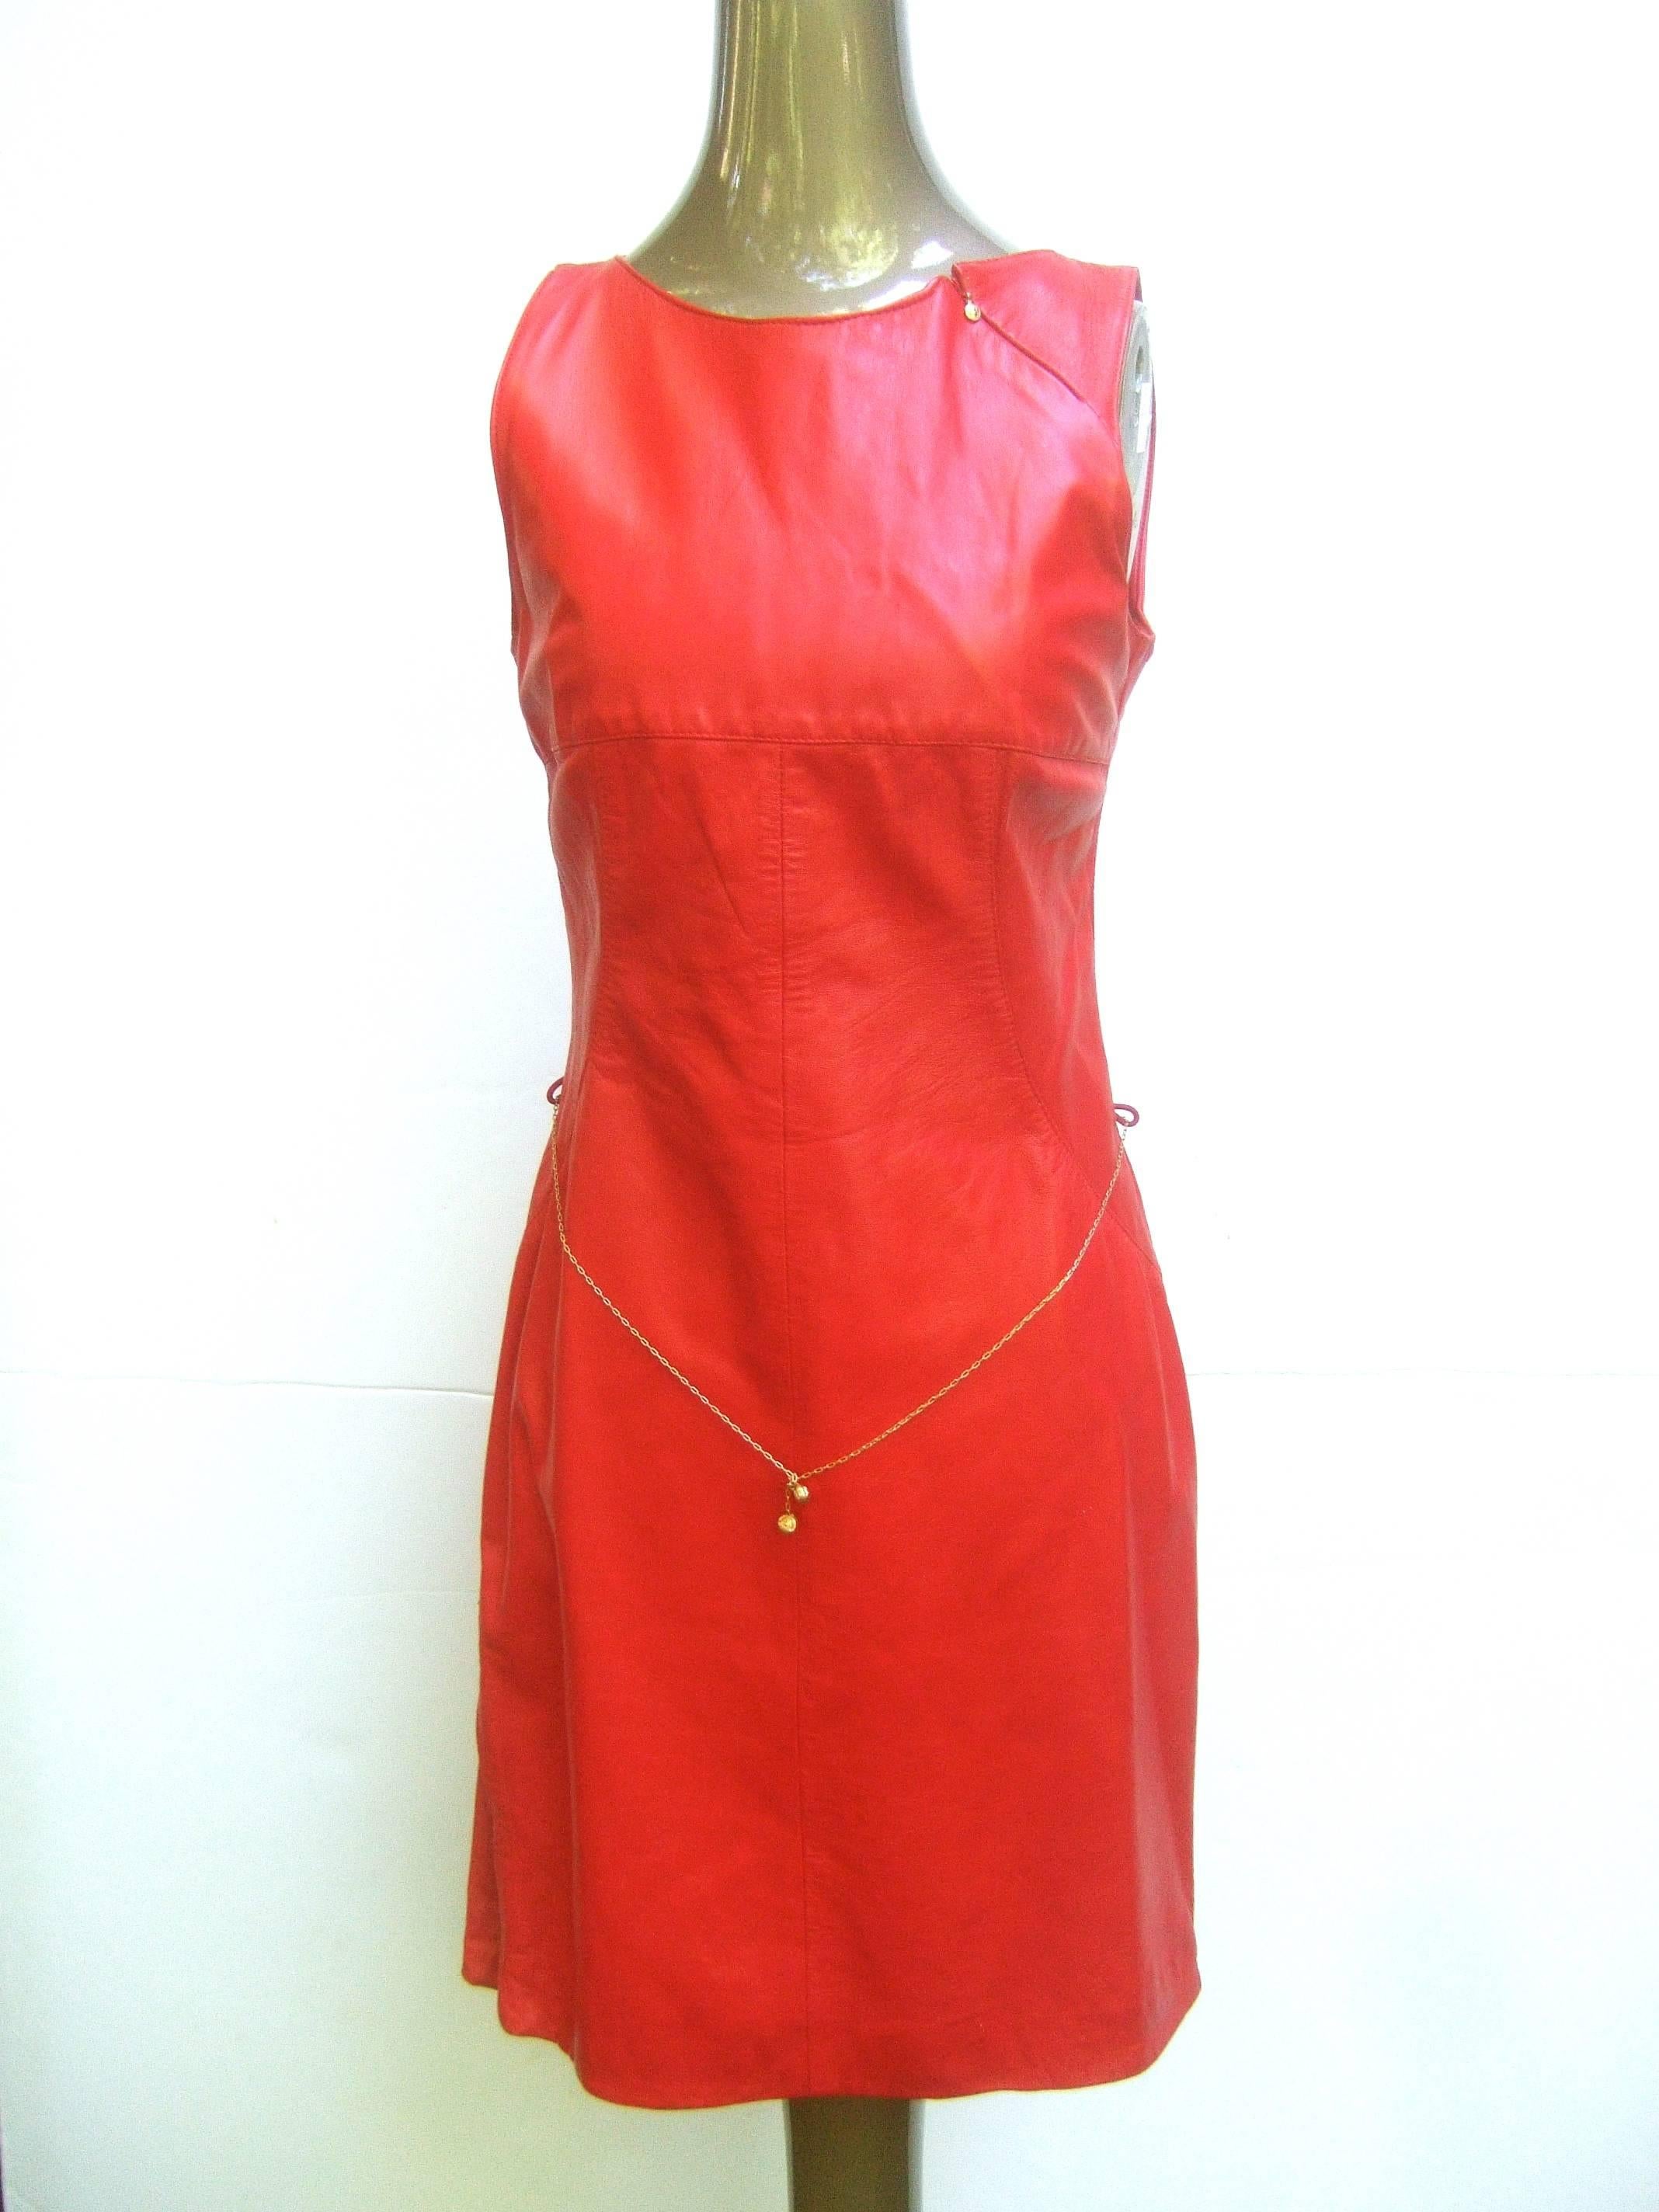 Women's Versace Cherry Red Leather Dress with Gilt Belt. For Sale